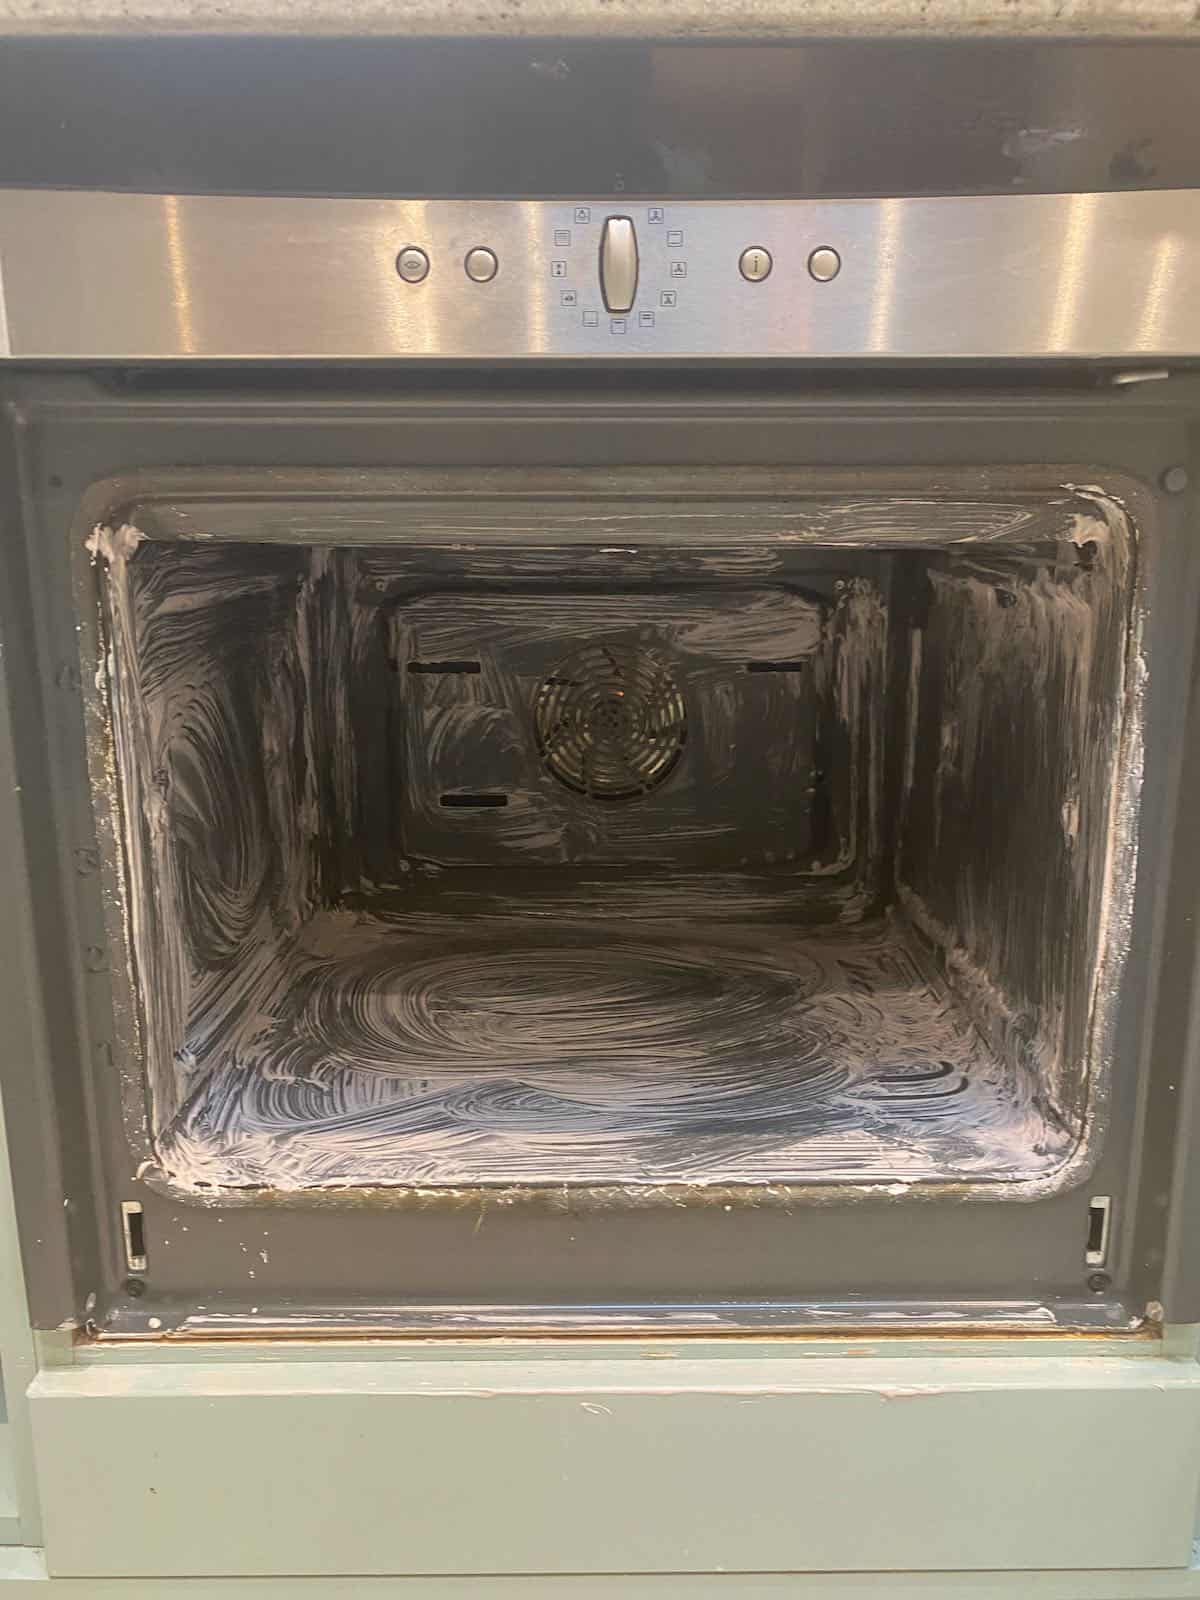 An empty oven being cleaned with baking soda